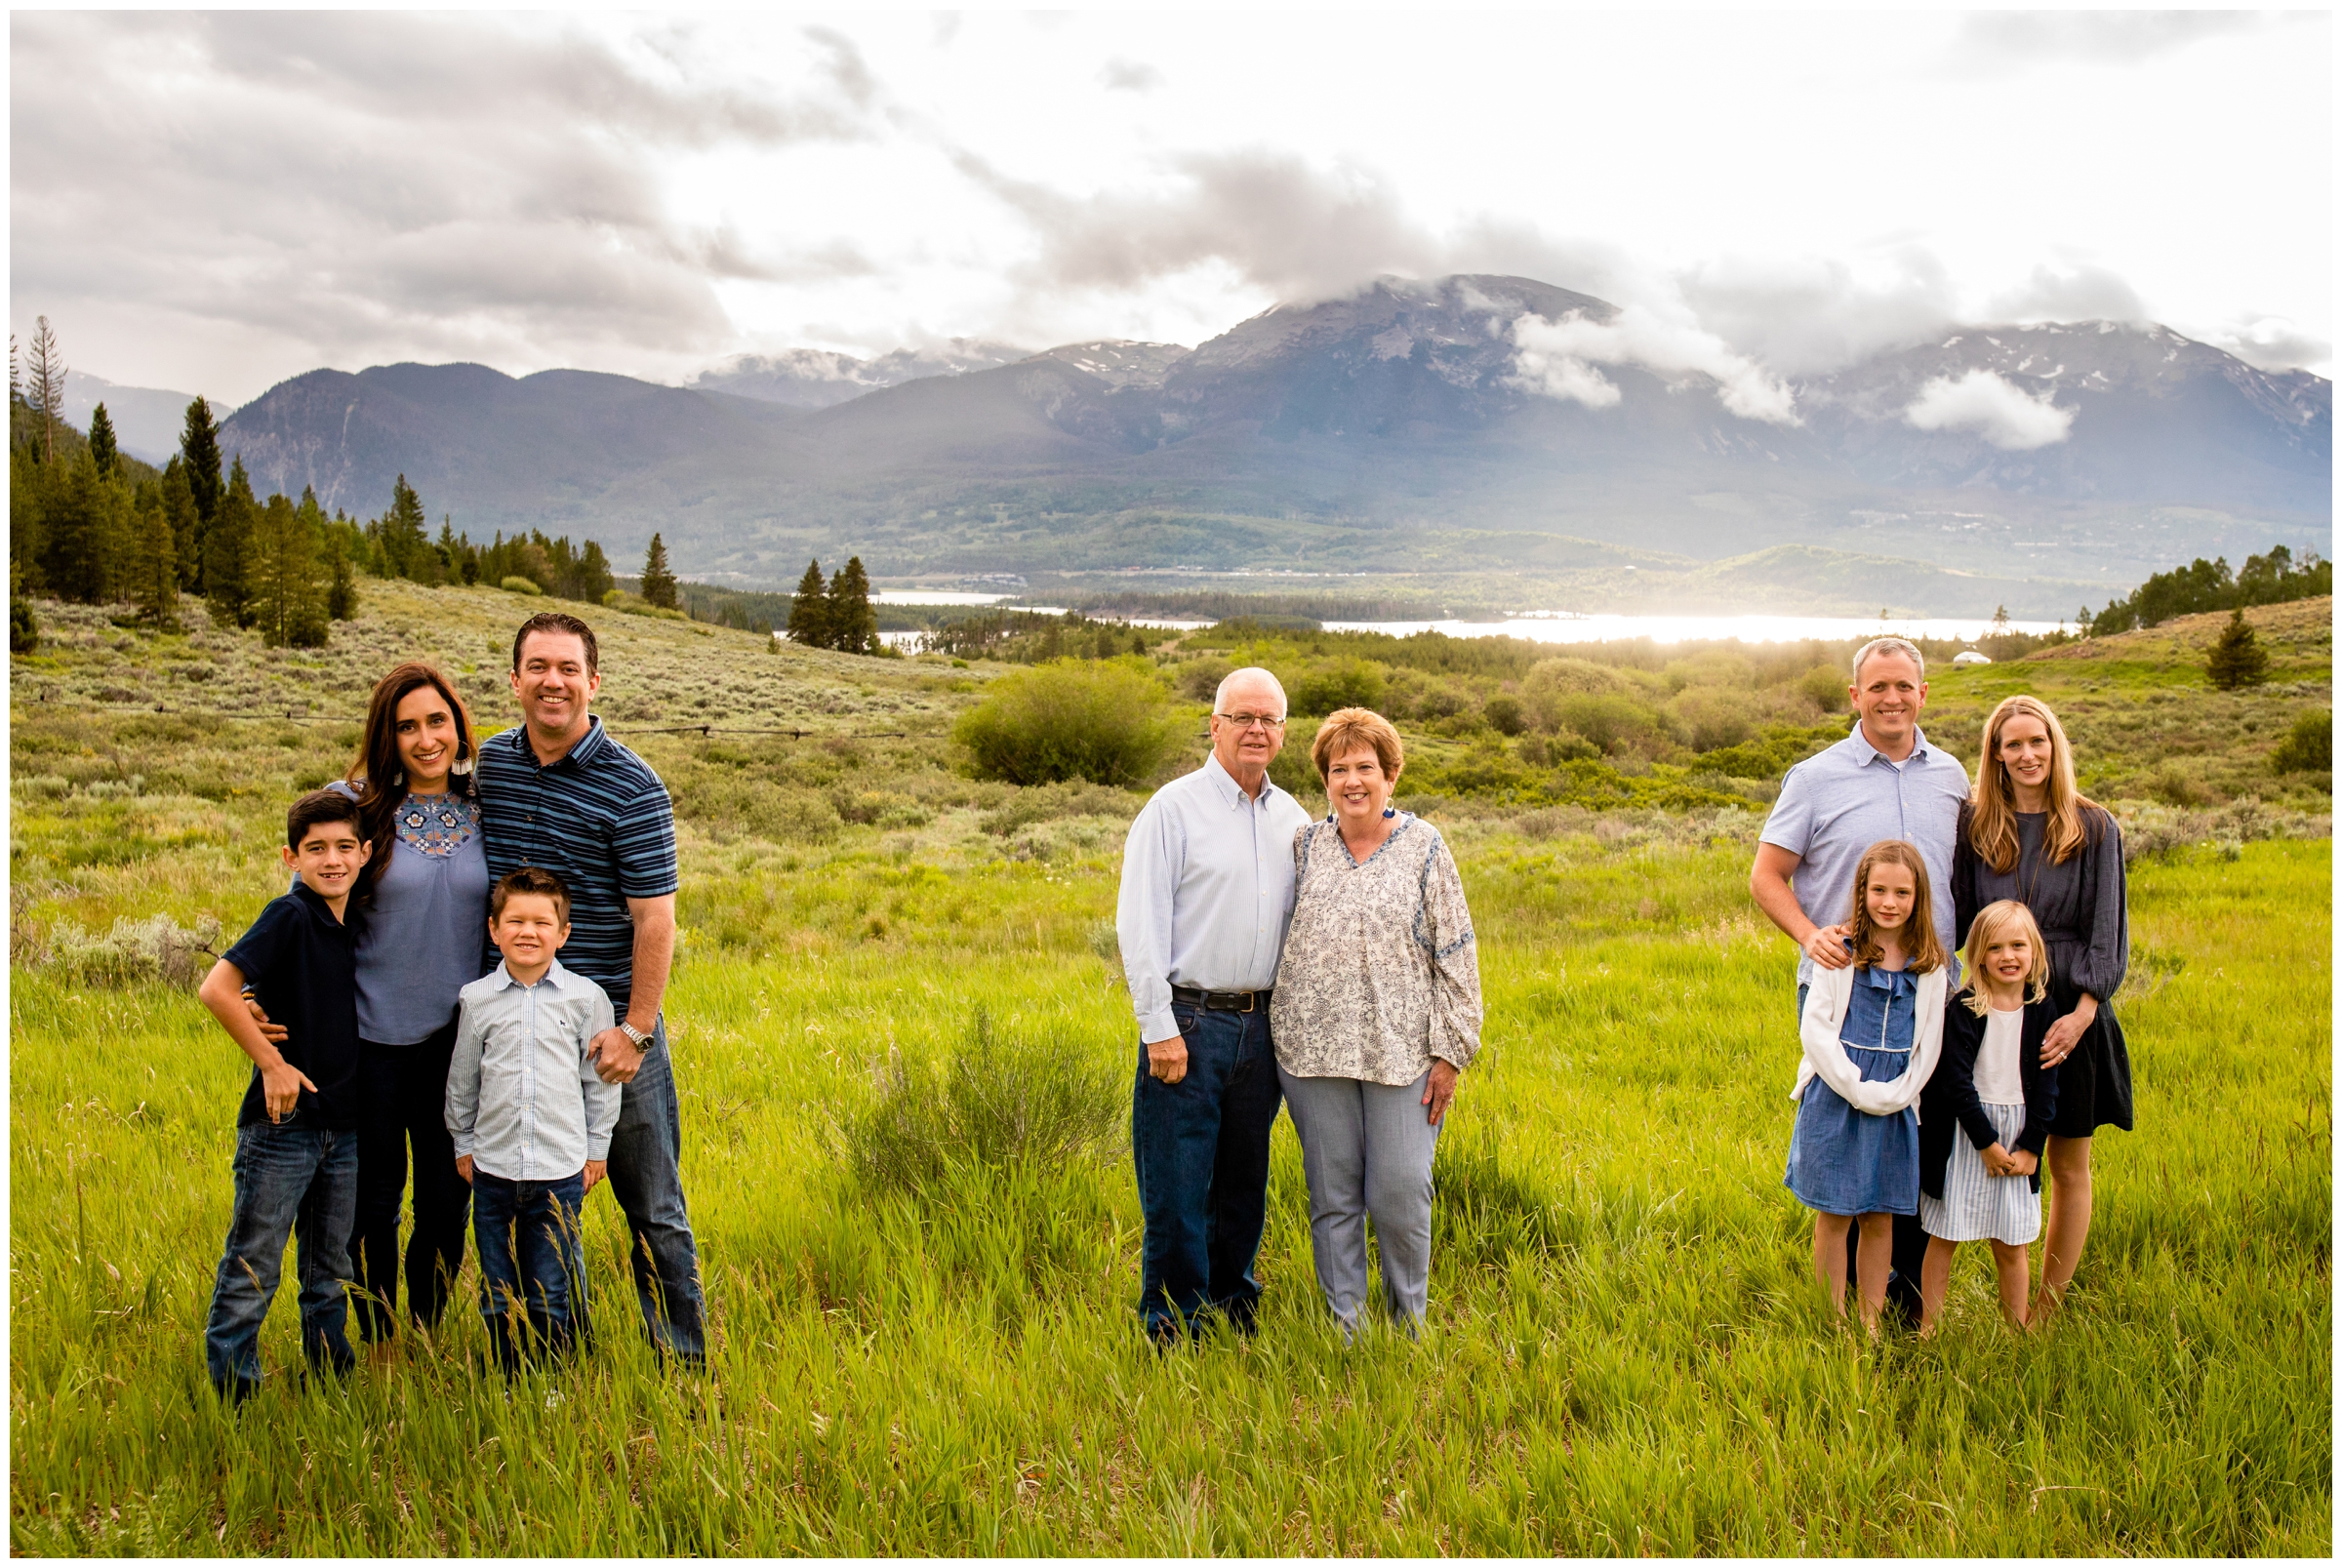 extended family photography inspiration in the Breckenridge Colorado mountains